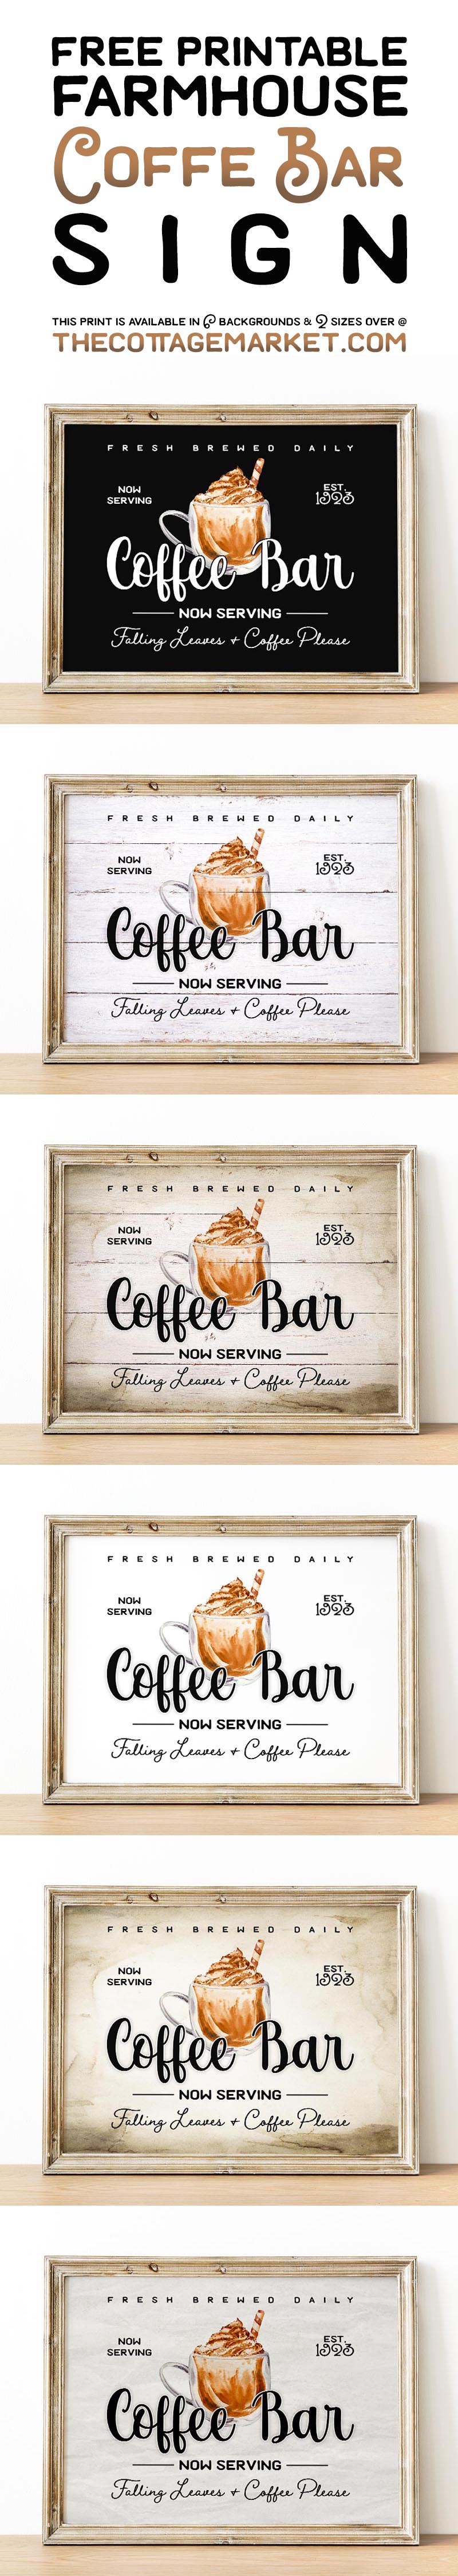 This Cool Free Printable Farmhouse Coffee Bar Sign will look fabulous over your Coffee Bar this Thanksgiving Season!